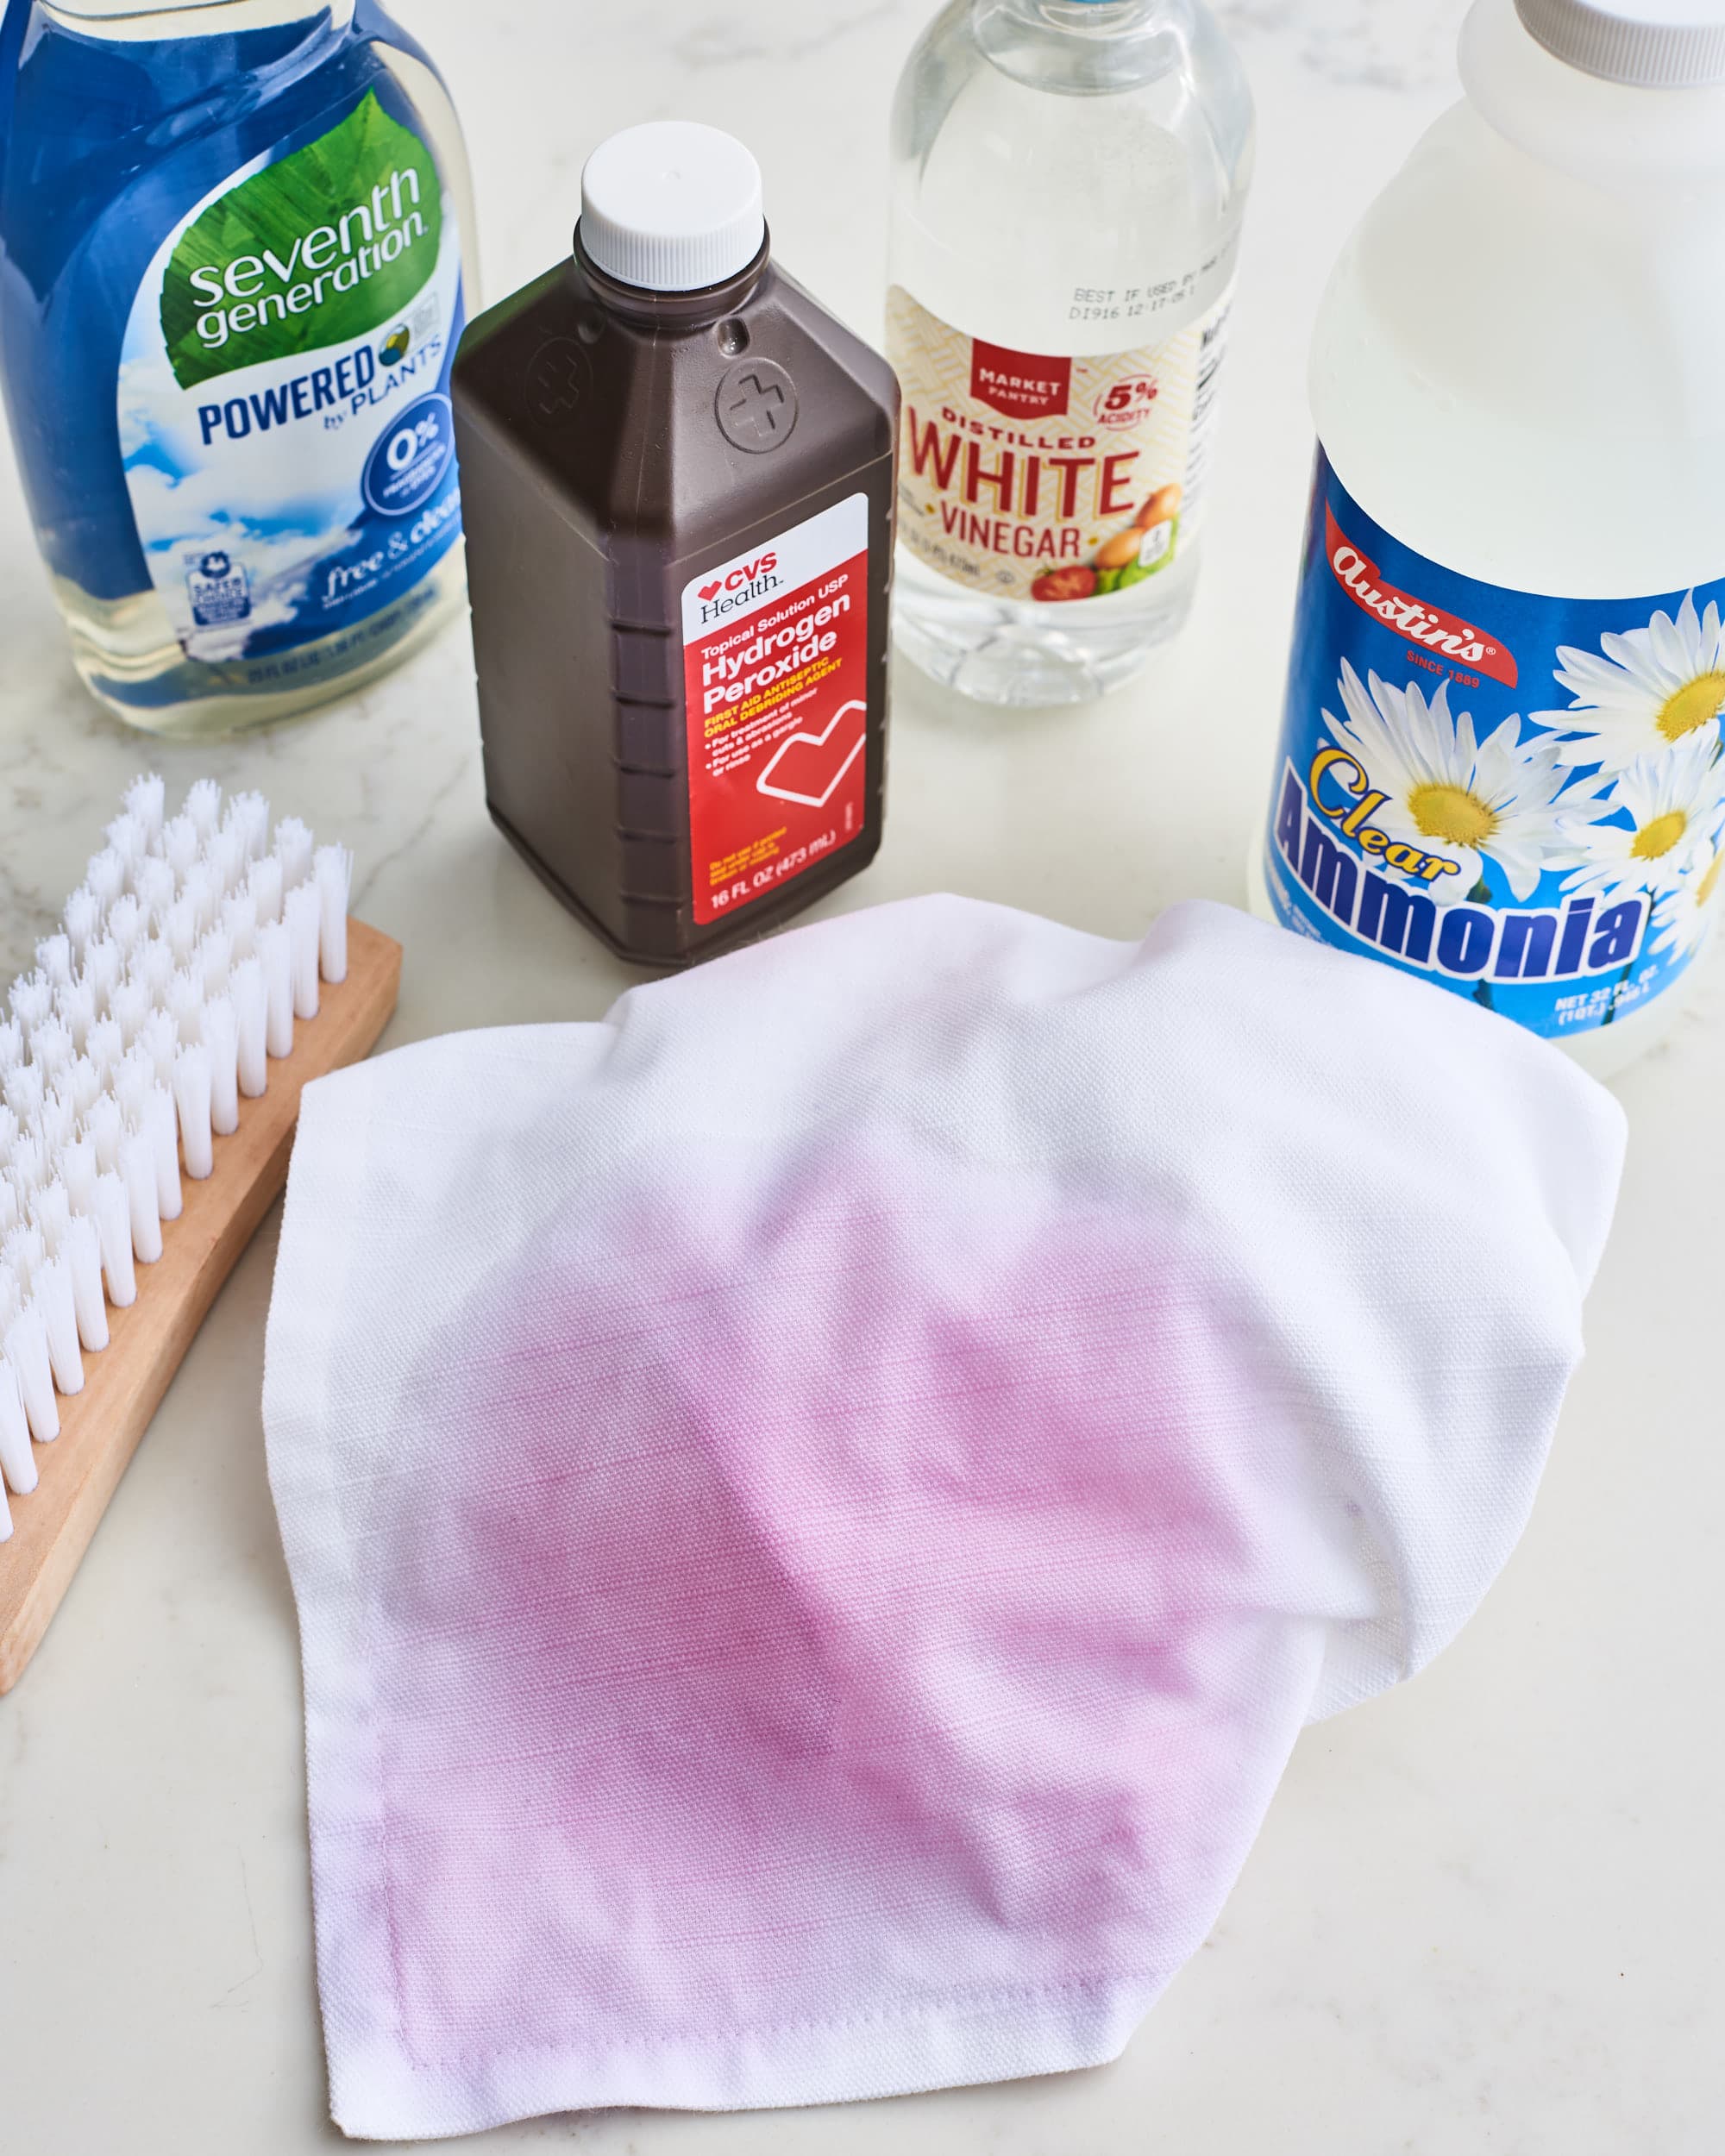 Why Are There Bleach Stains on my Towels? - Home-Ec 101